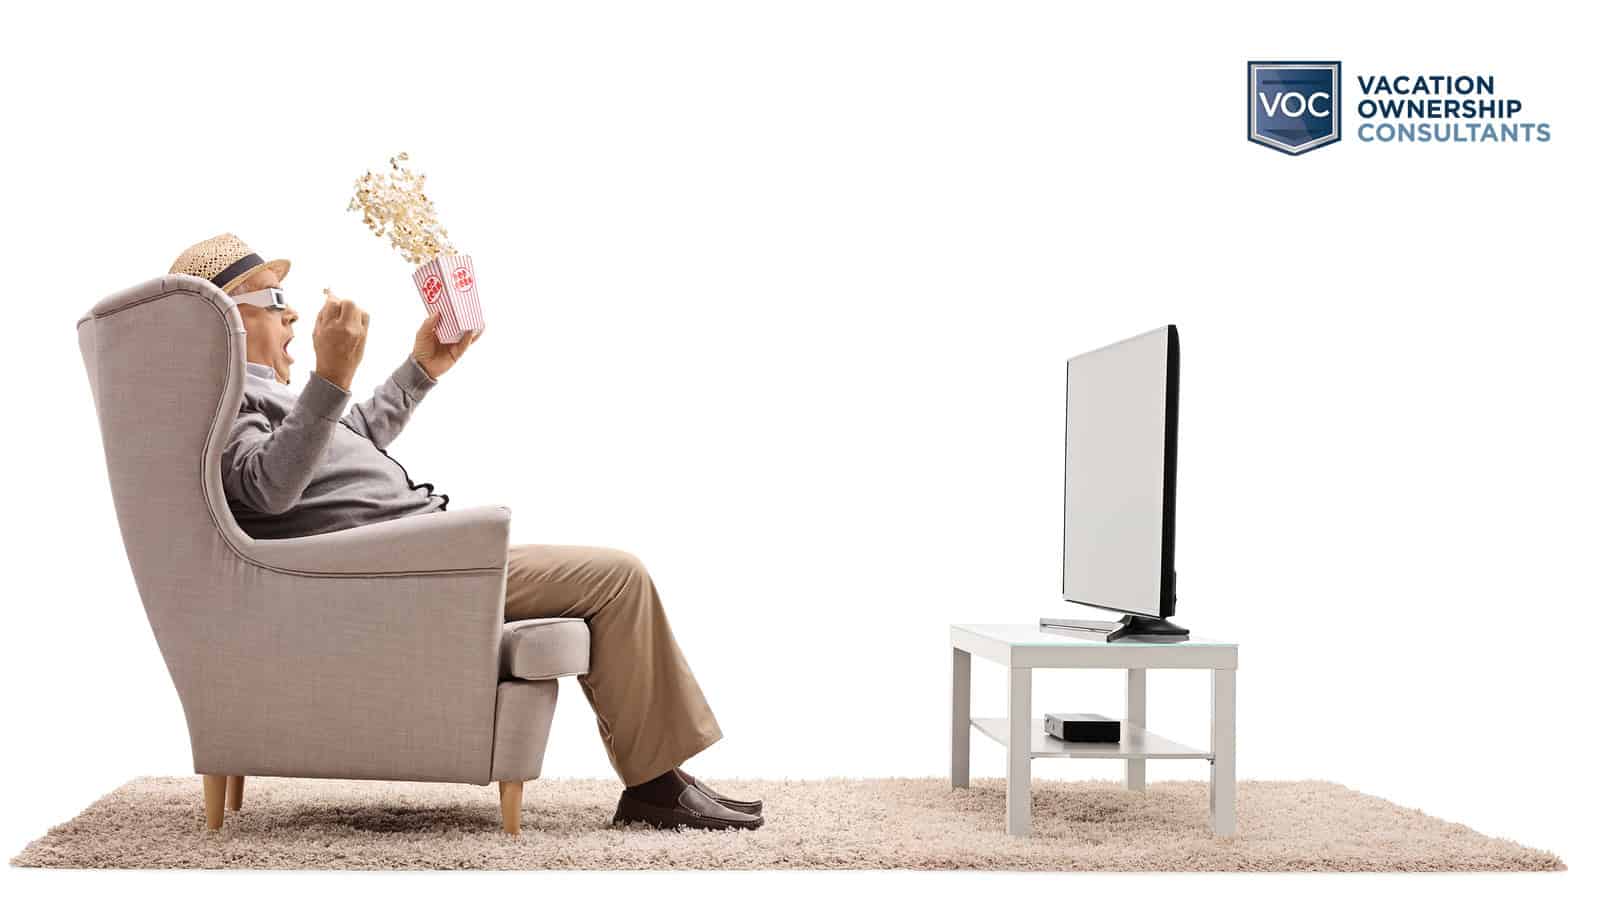 premium-electronics-and-other-small-purchases-can-be-had-after-exiting-a-timeshare-contract-for-good-old-man-eating-popcorn-watching-tv